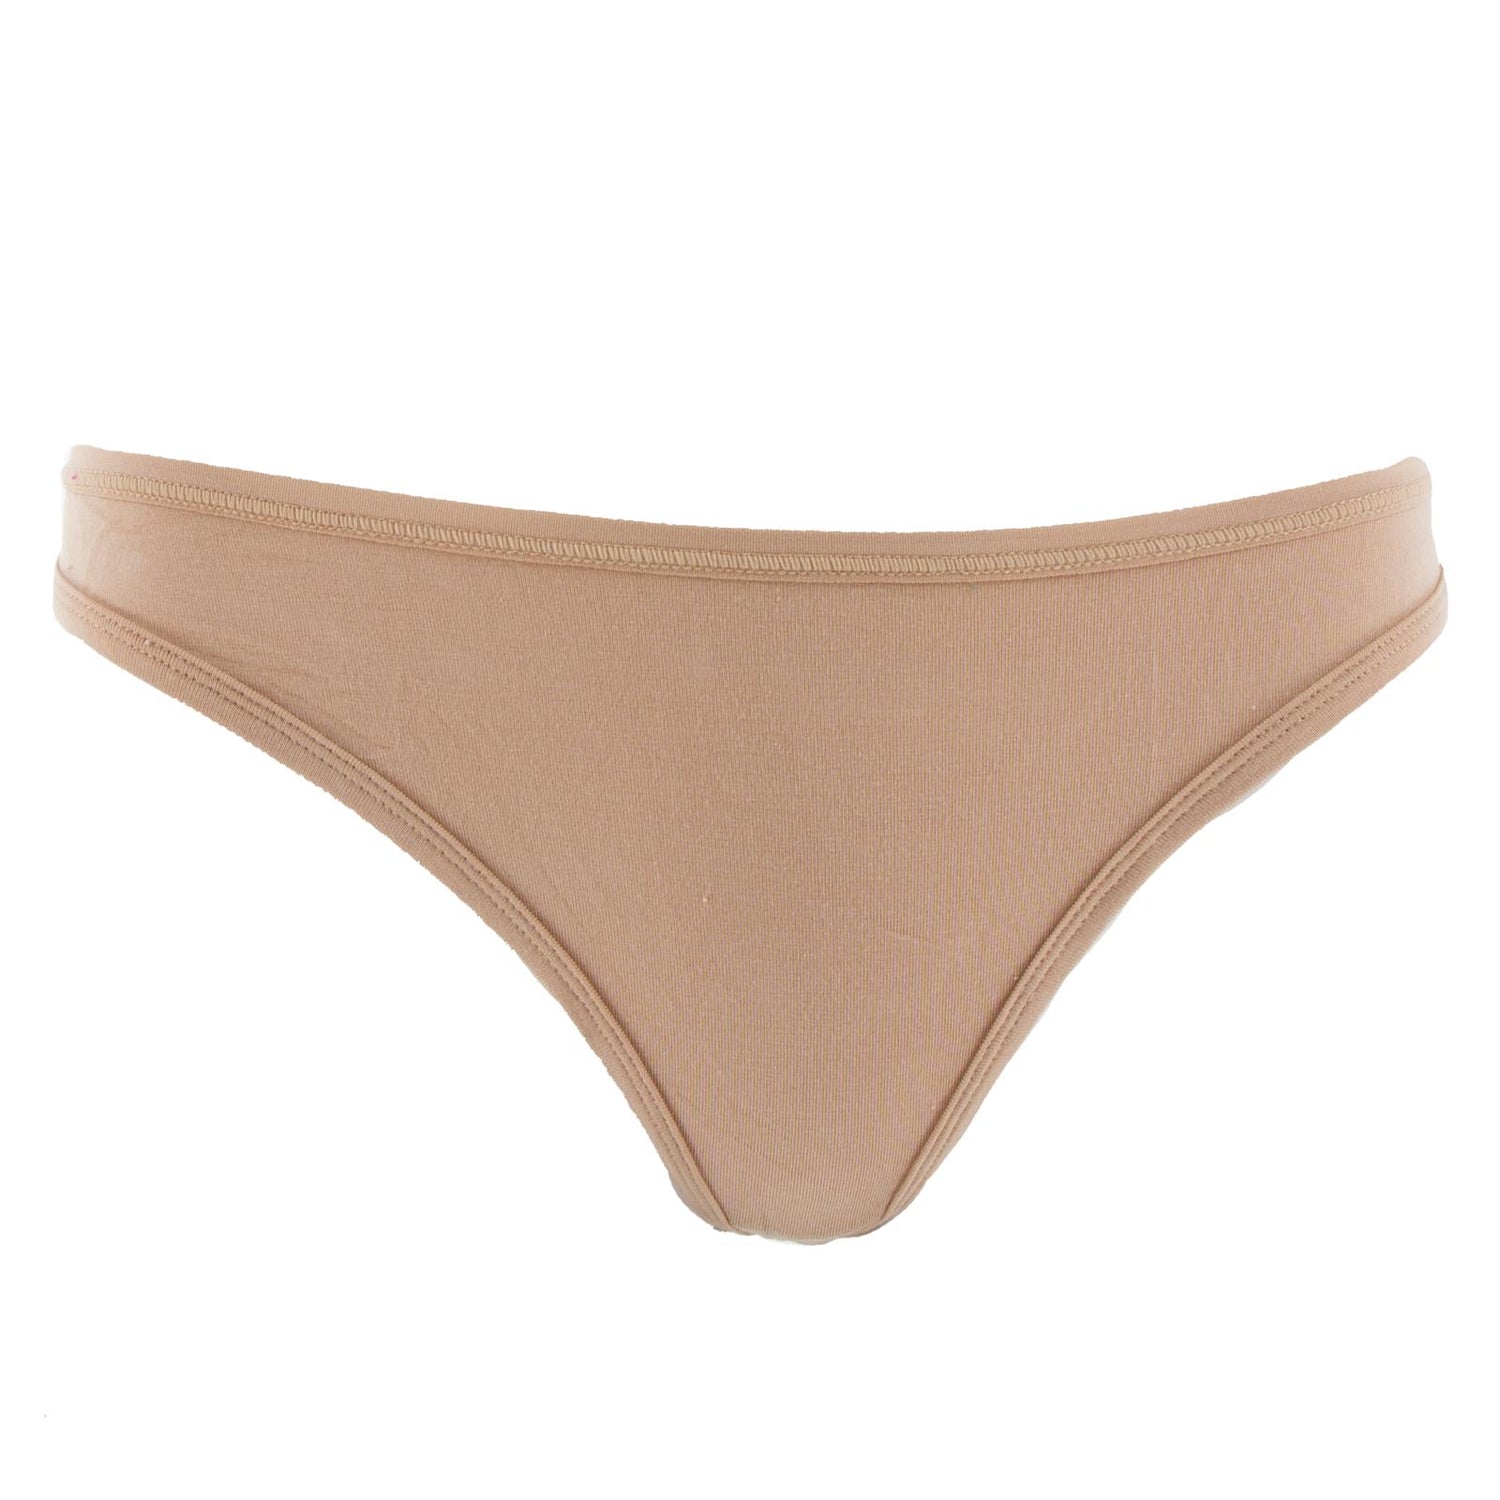 Women's Solid Classic Thong Underwear in Suede